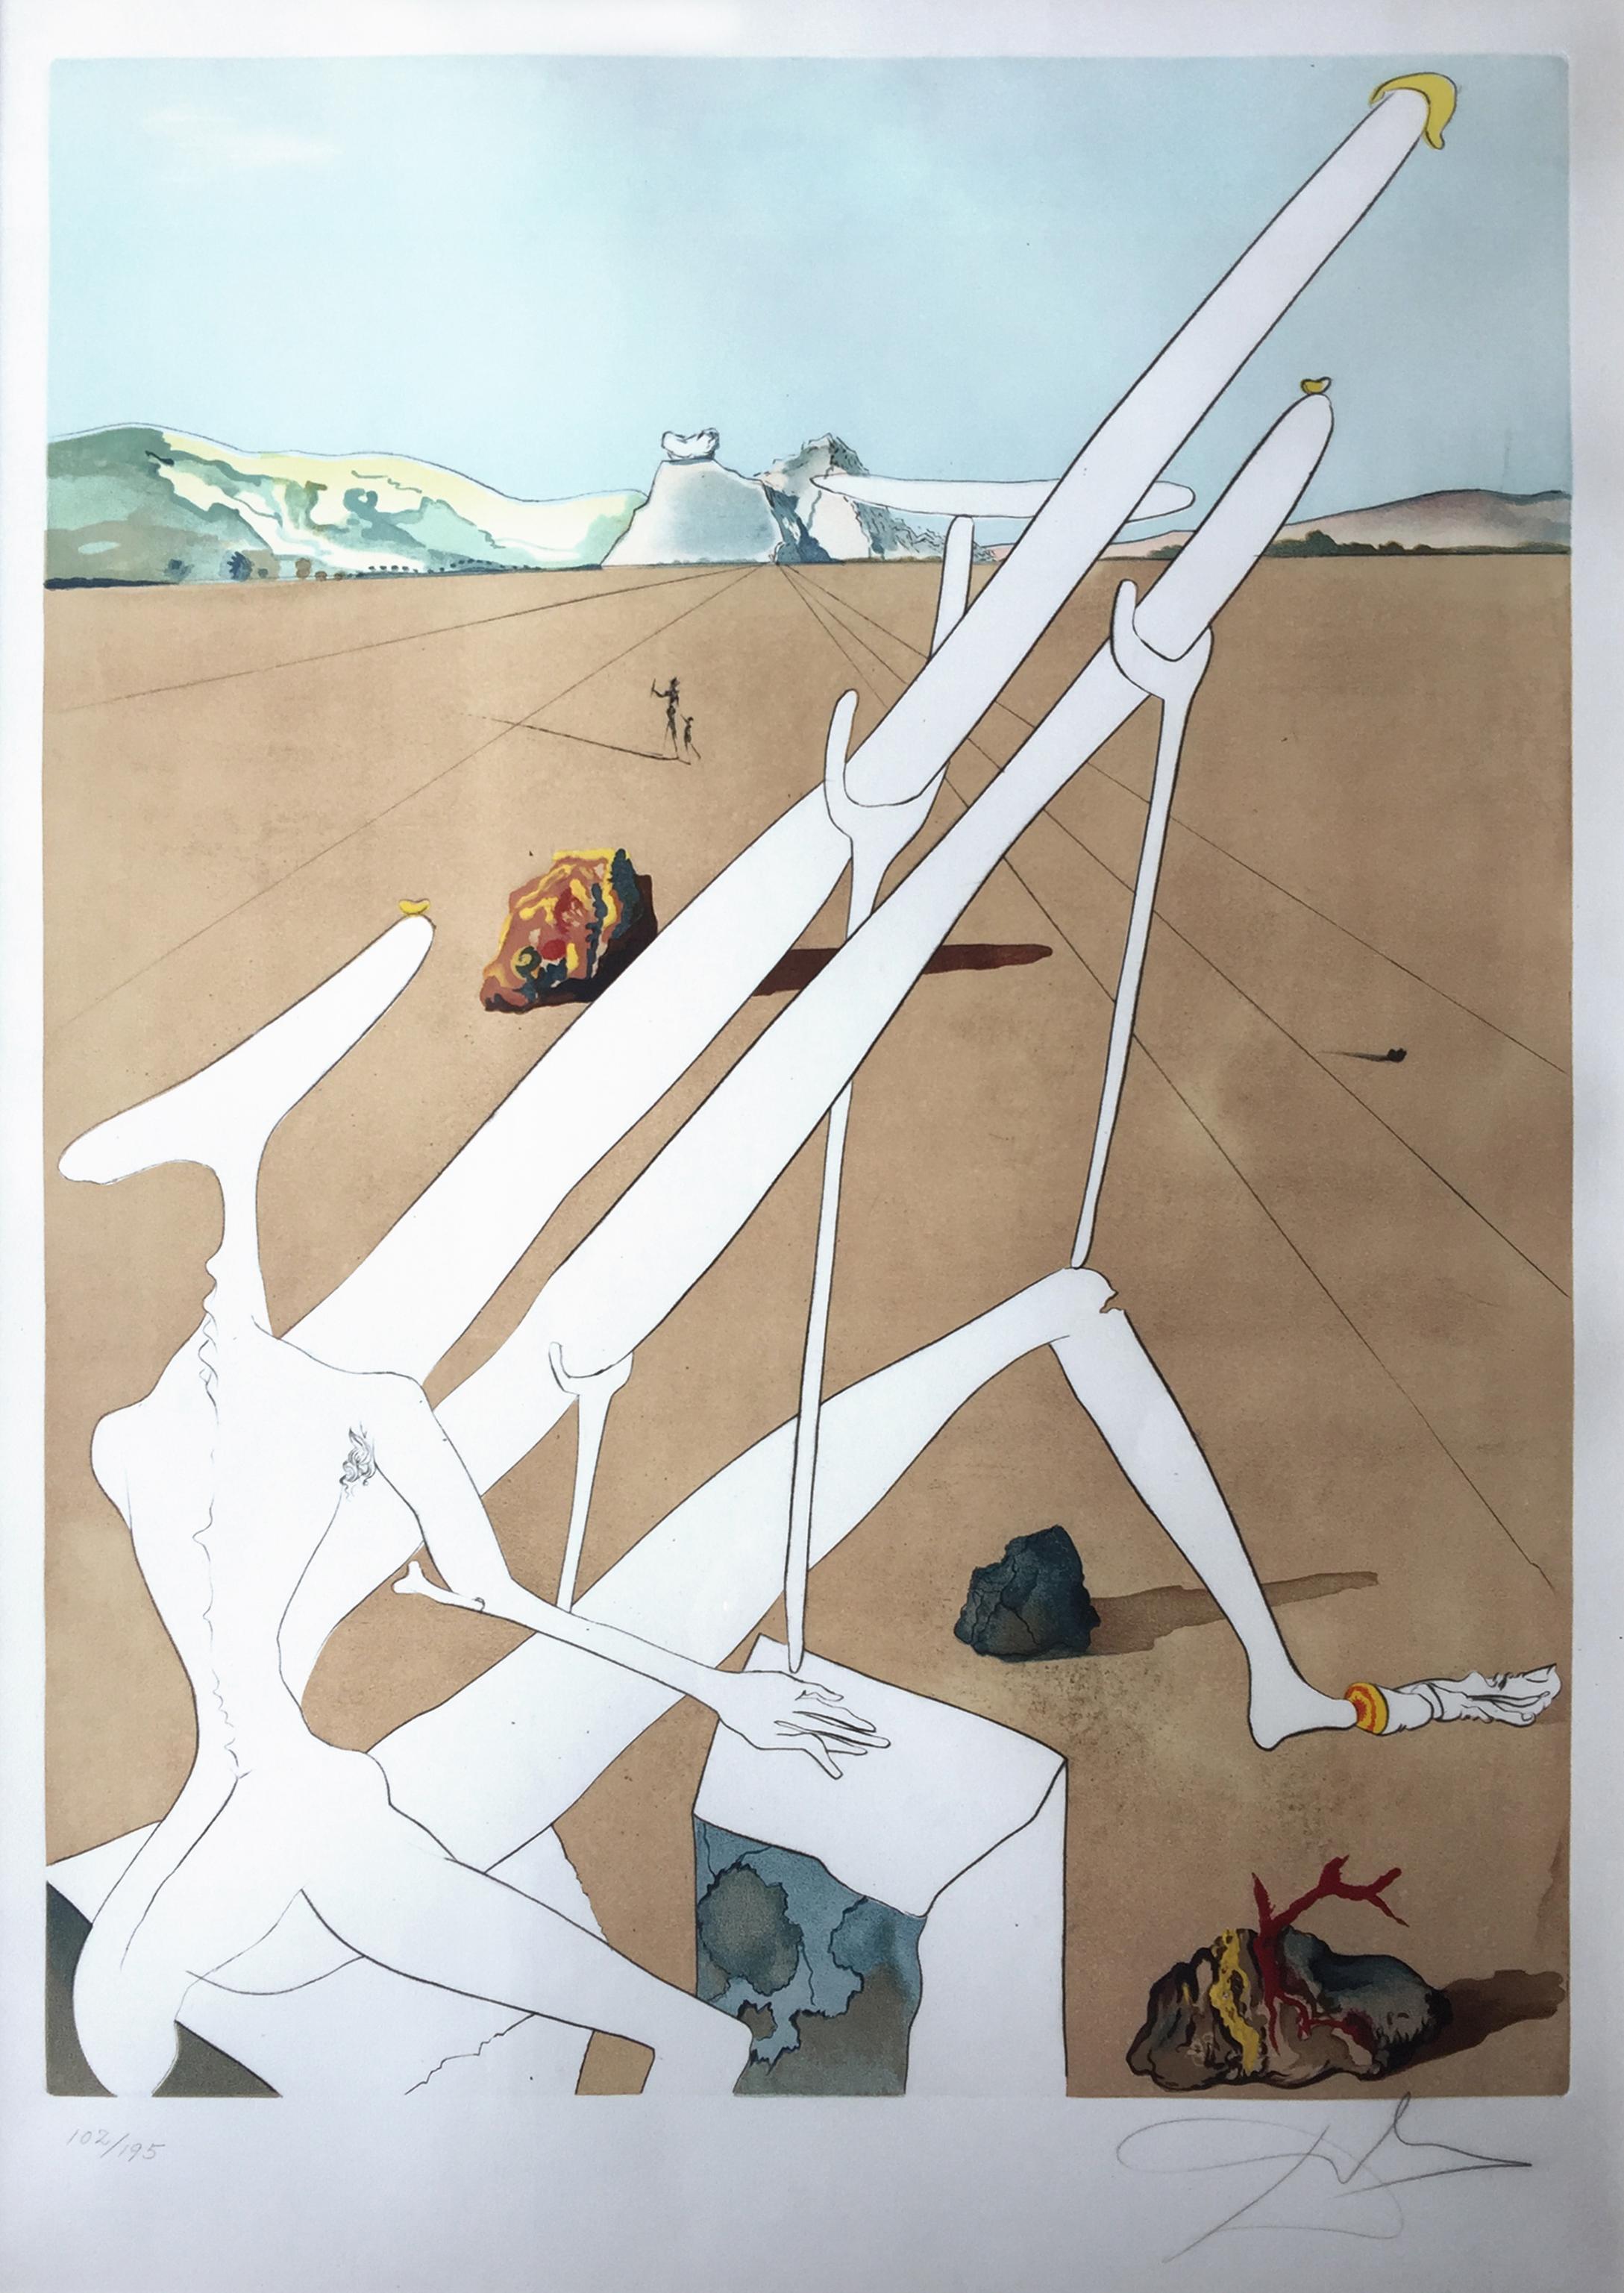 Martian Dali equipped with double holoelectronic microscope - Print by Salvador Dalí